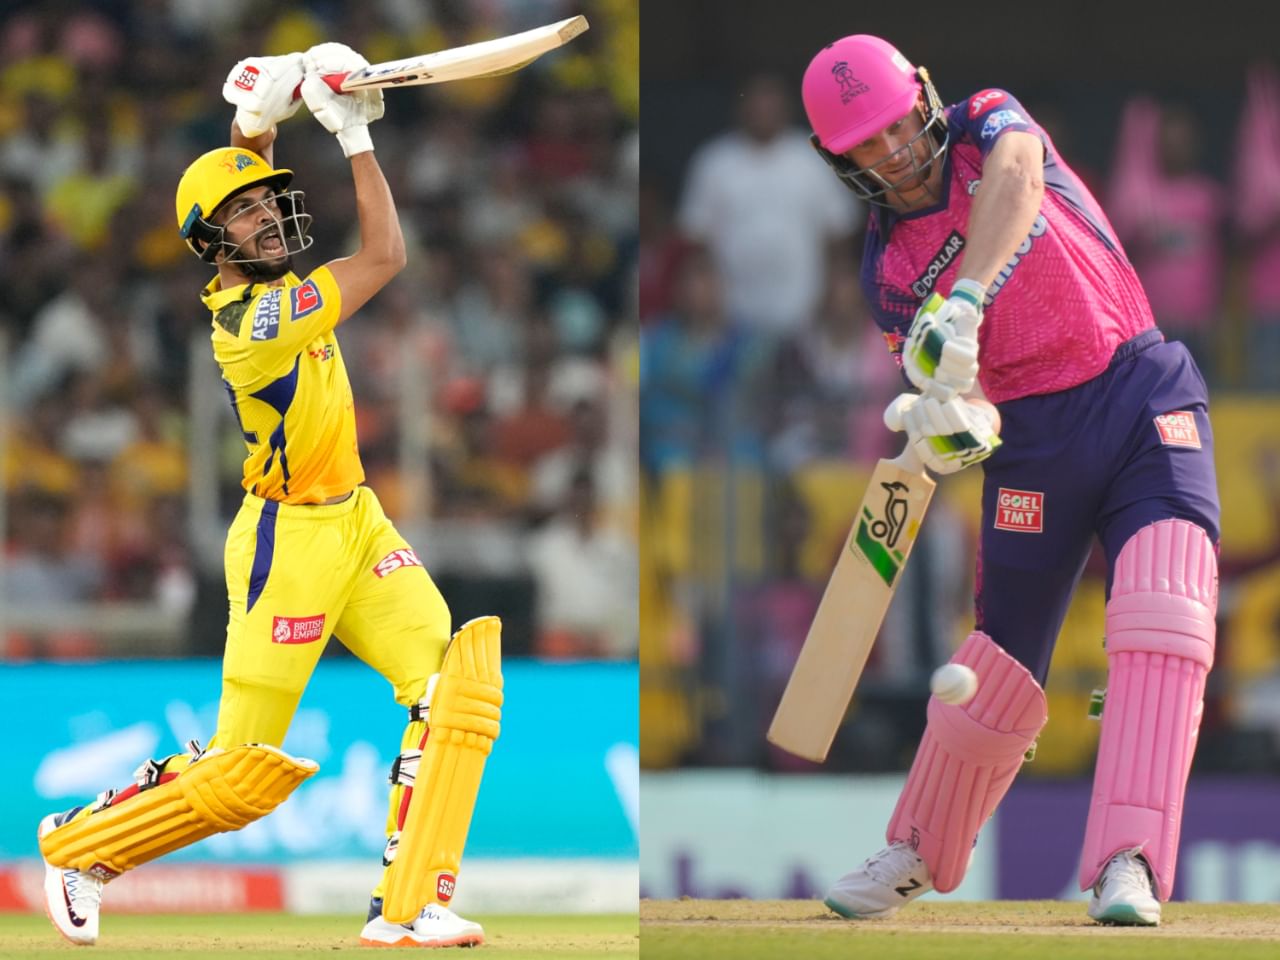 IPL 2023: CSK vs RR today match Dream11 prediction, top picks, timings, and likely playing XIs